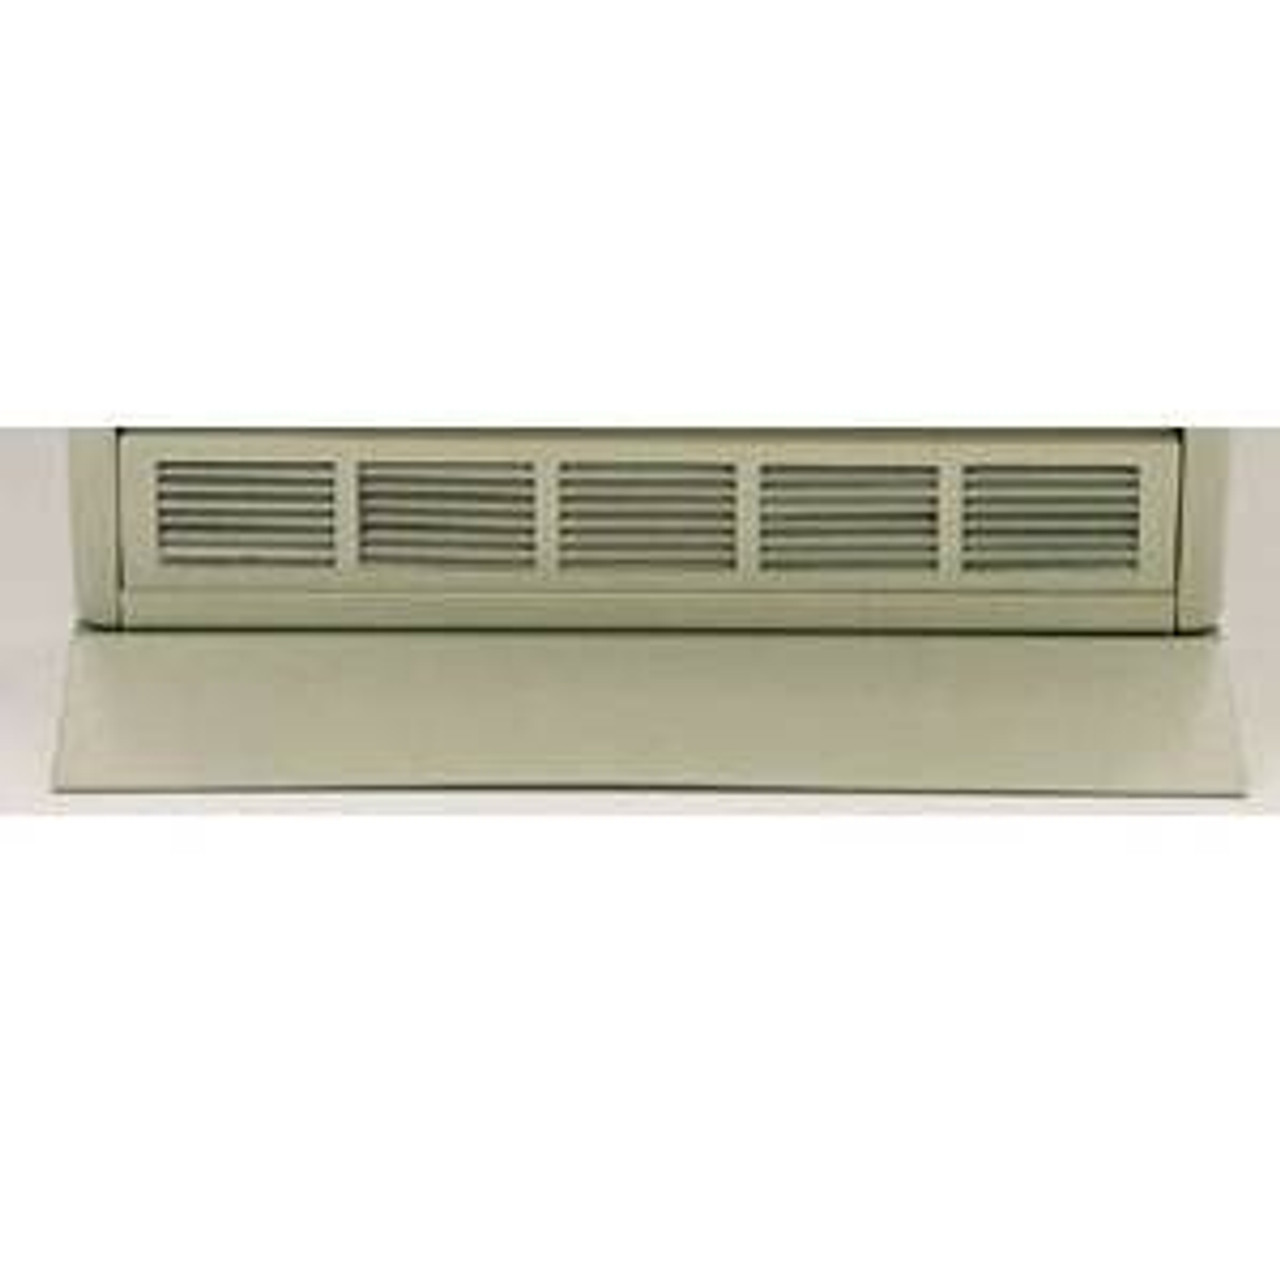 Empire Sr18T Vent Free Gas Heater With Thermostatic Control